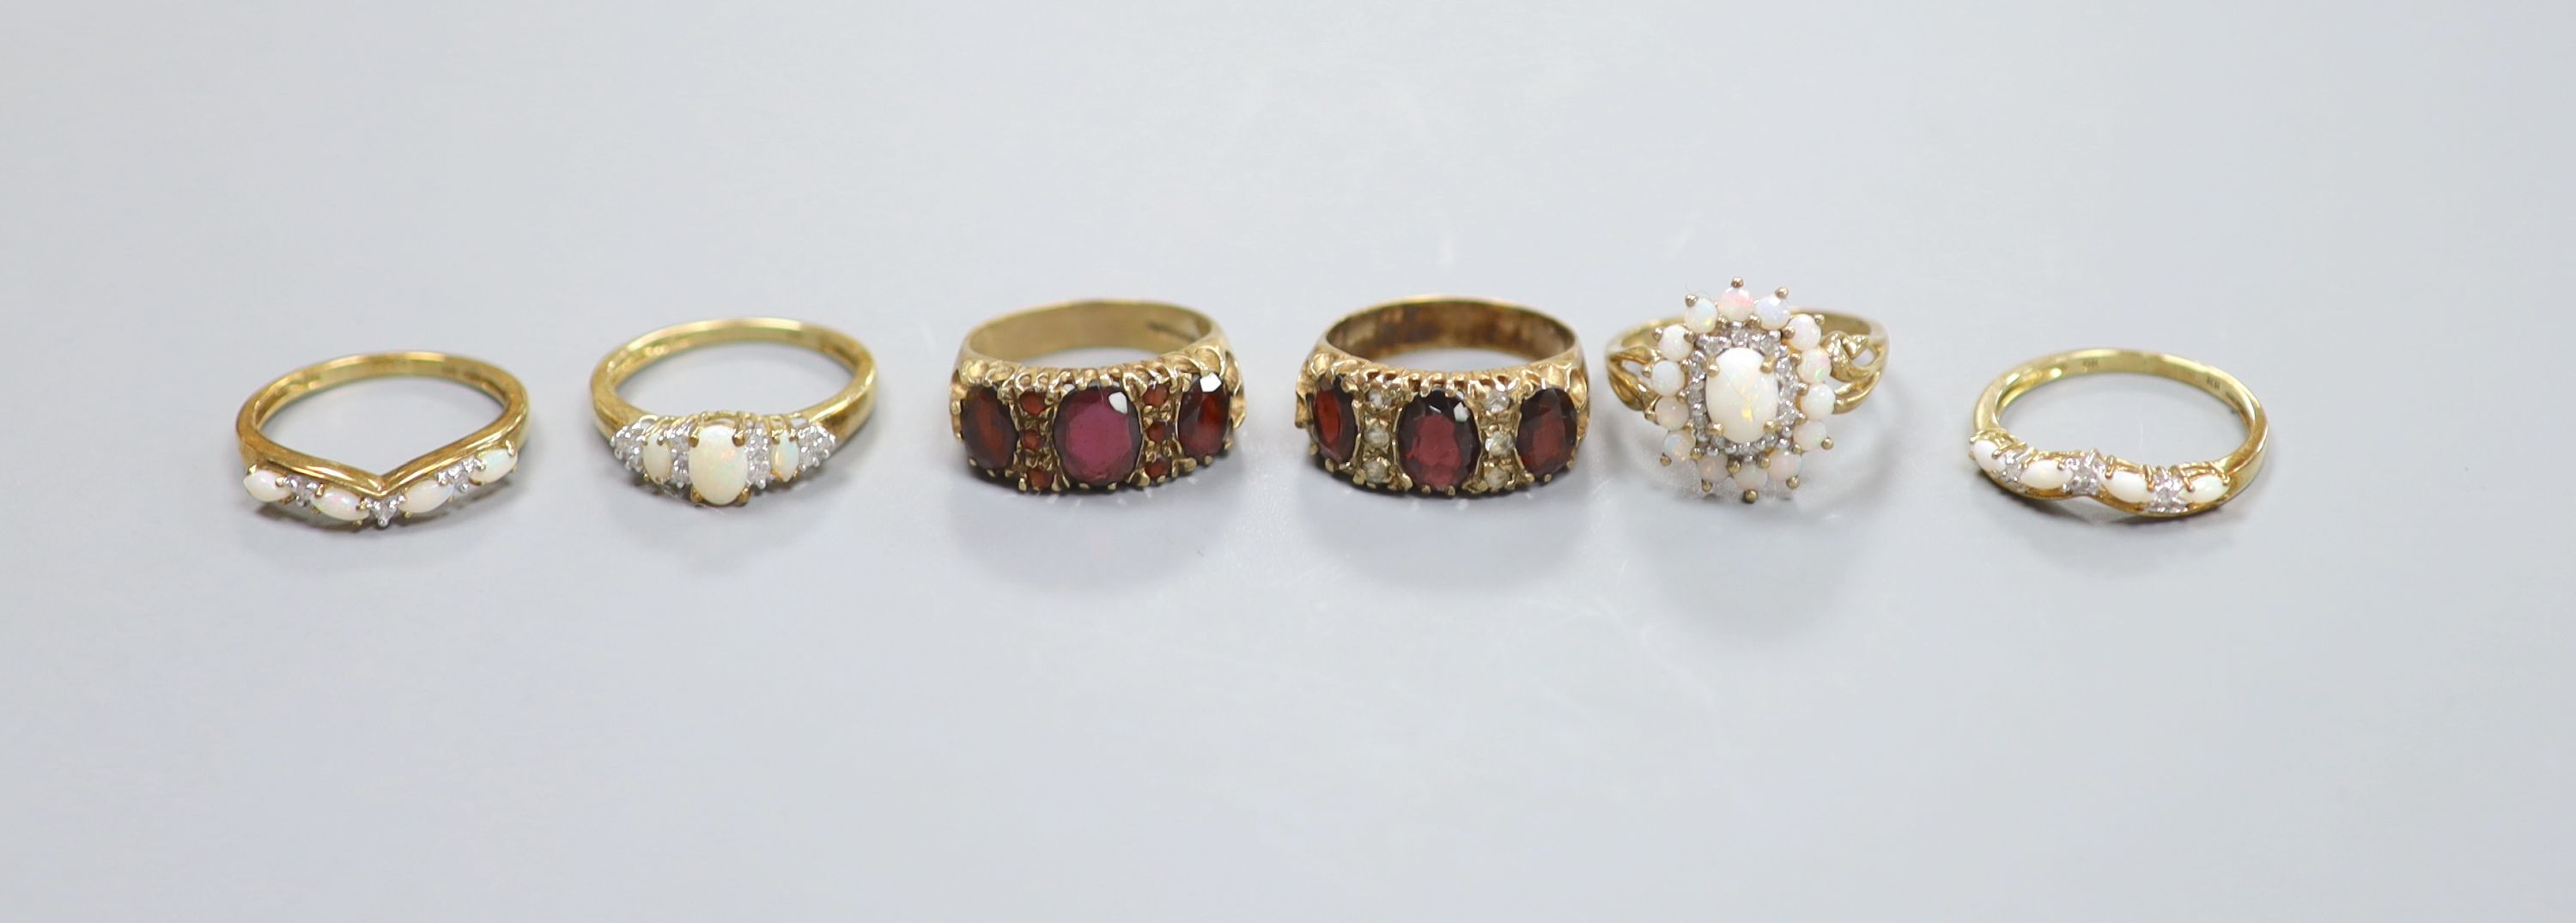 A suite of three opal and 9ct gold rings and three other 9ct gold gem-set rings